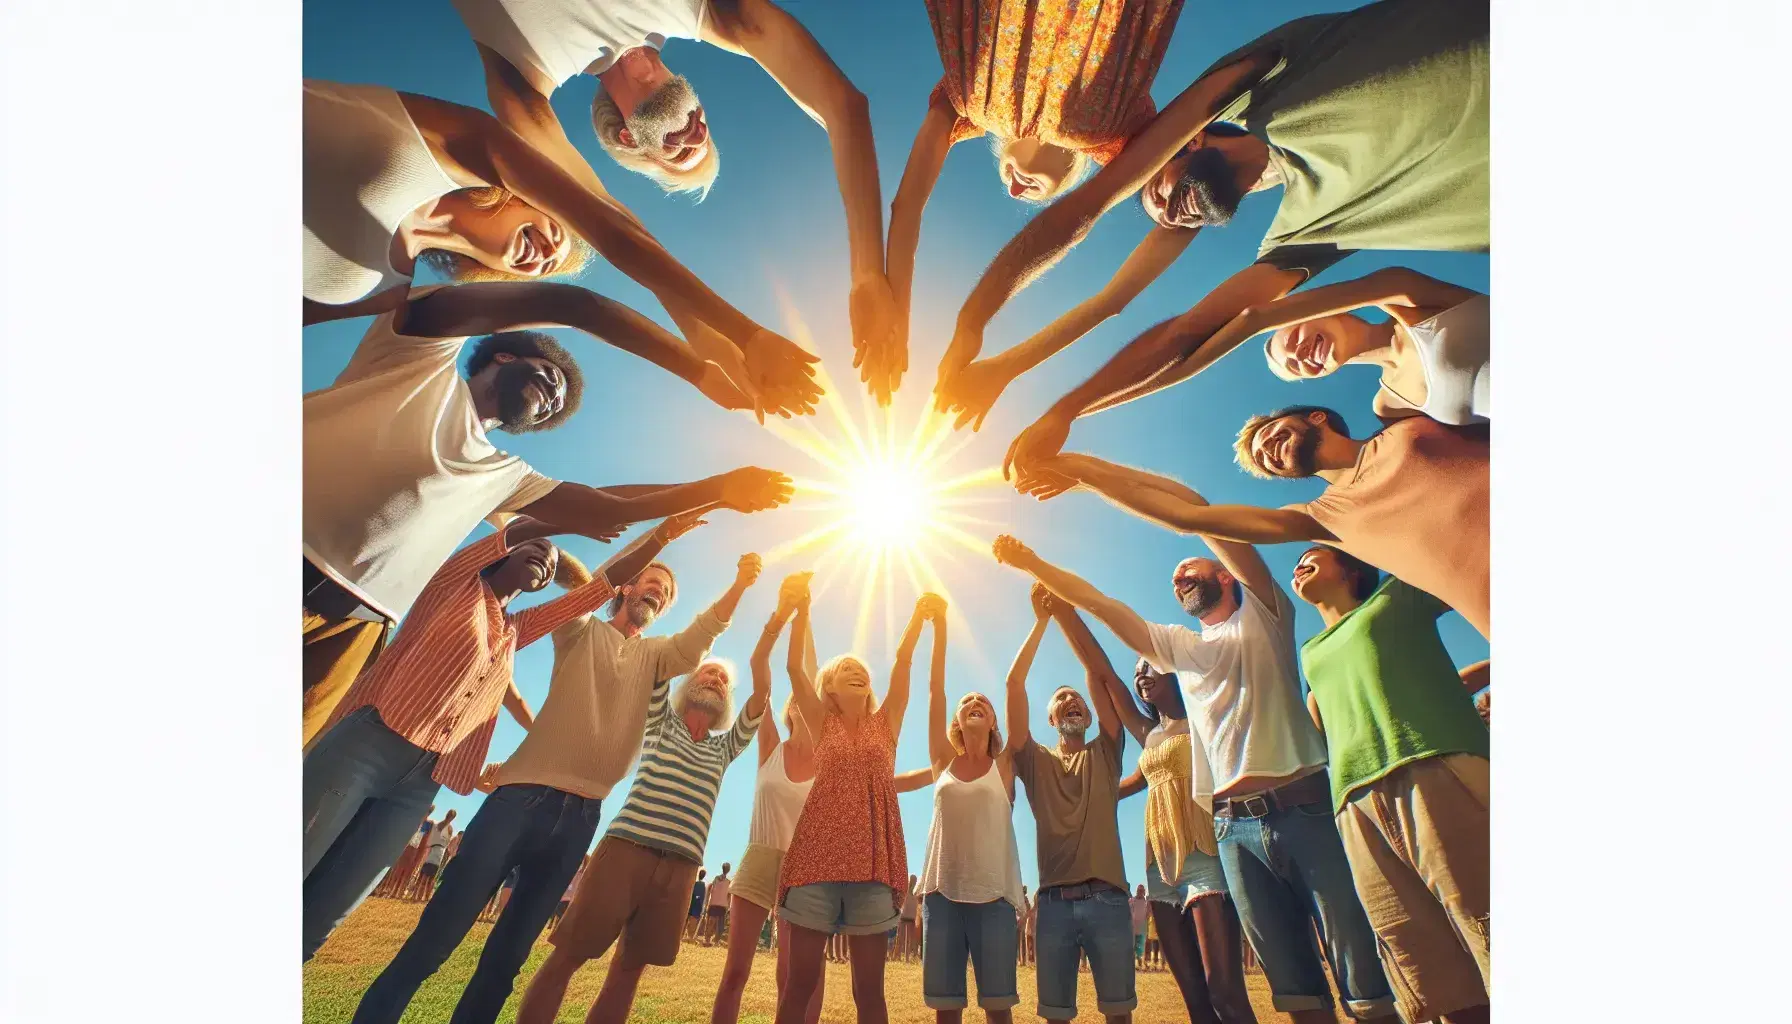 Multi-ethnic group in a circle outdoors with hands joined above their heads under a blue sky, expressing joy and unity on a sunny day.